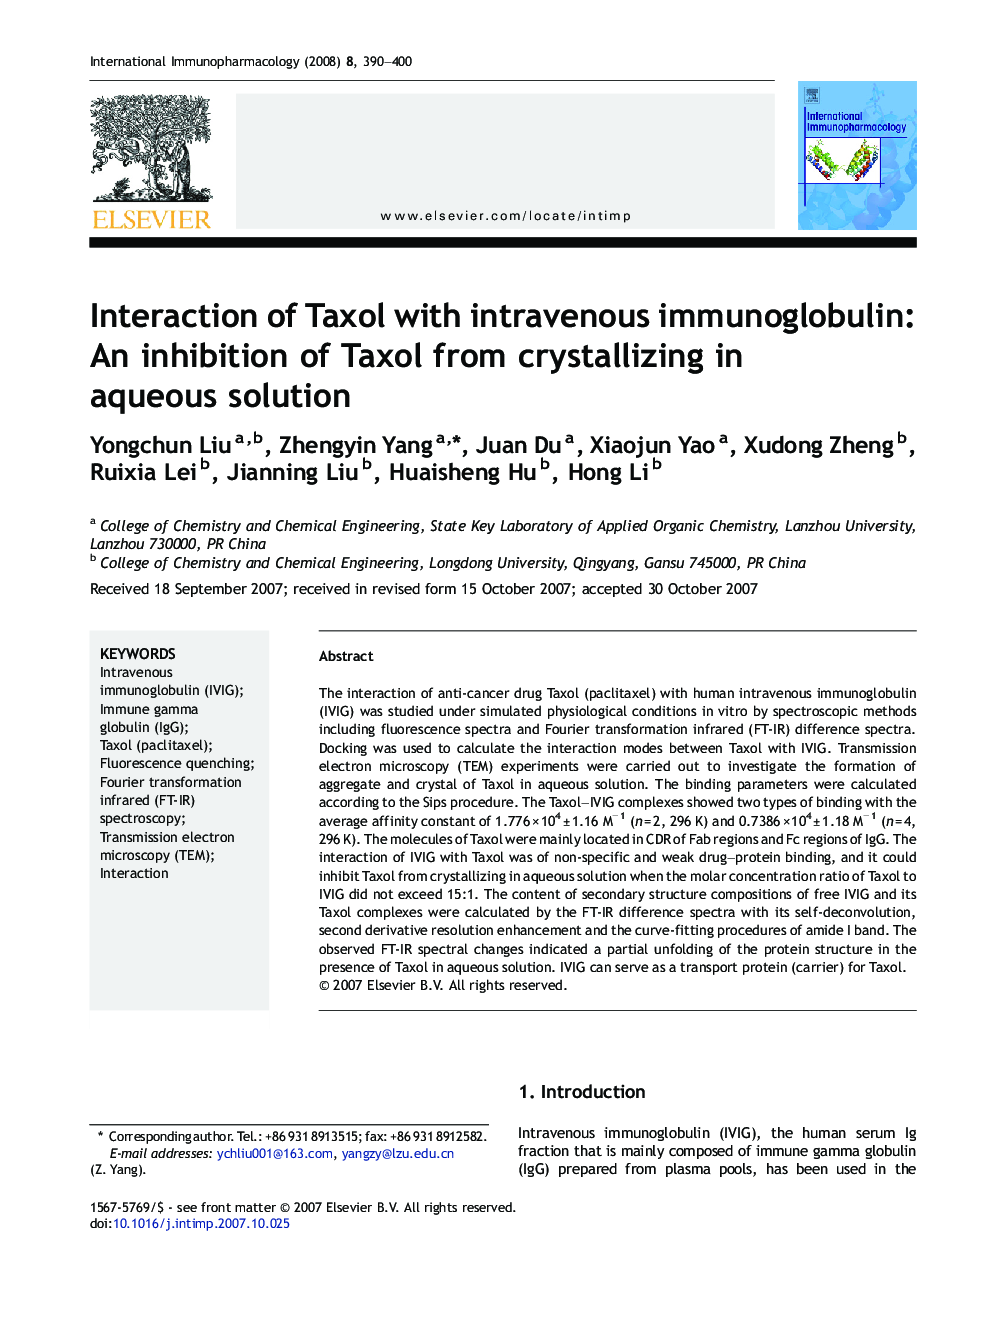 Interaction of Taxol with intravenous immunoglobulin: An inhibition of Taxol from crystallizing in aqueous solution